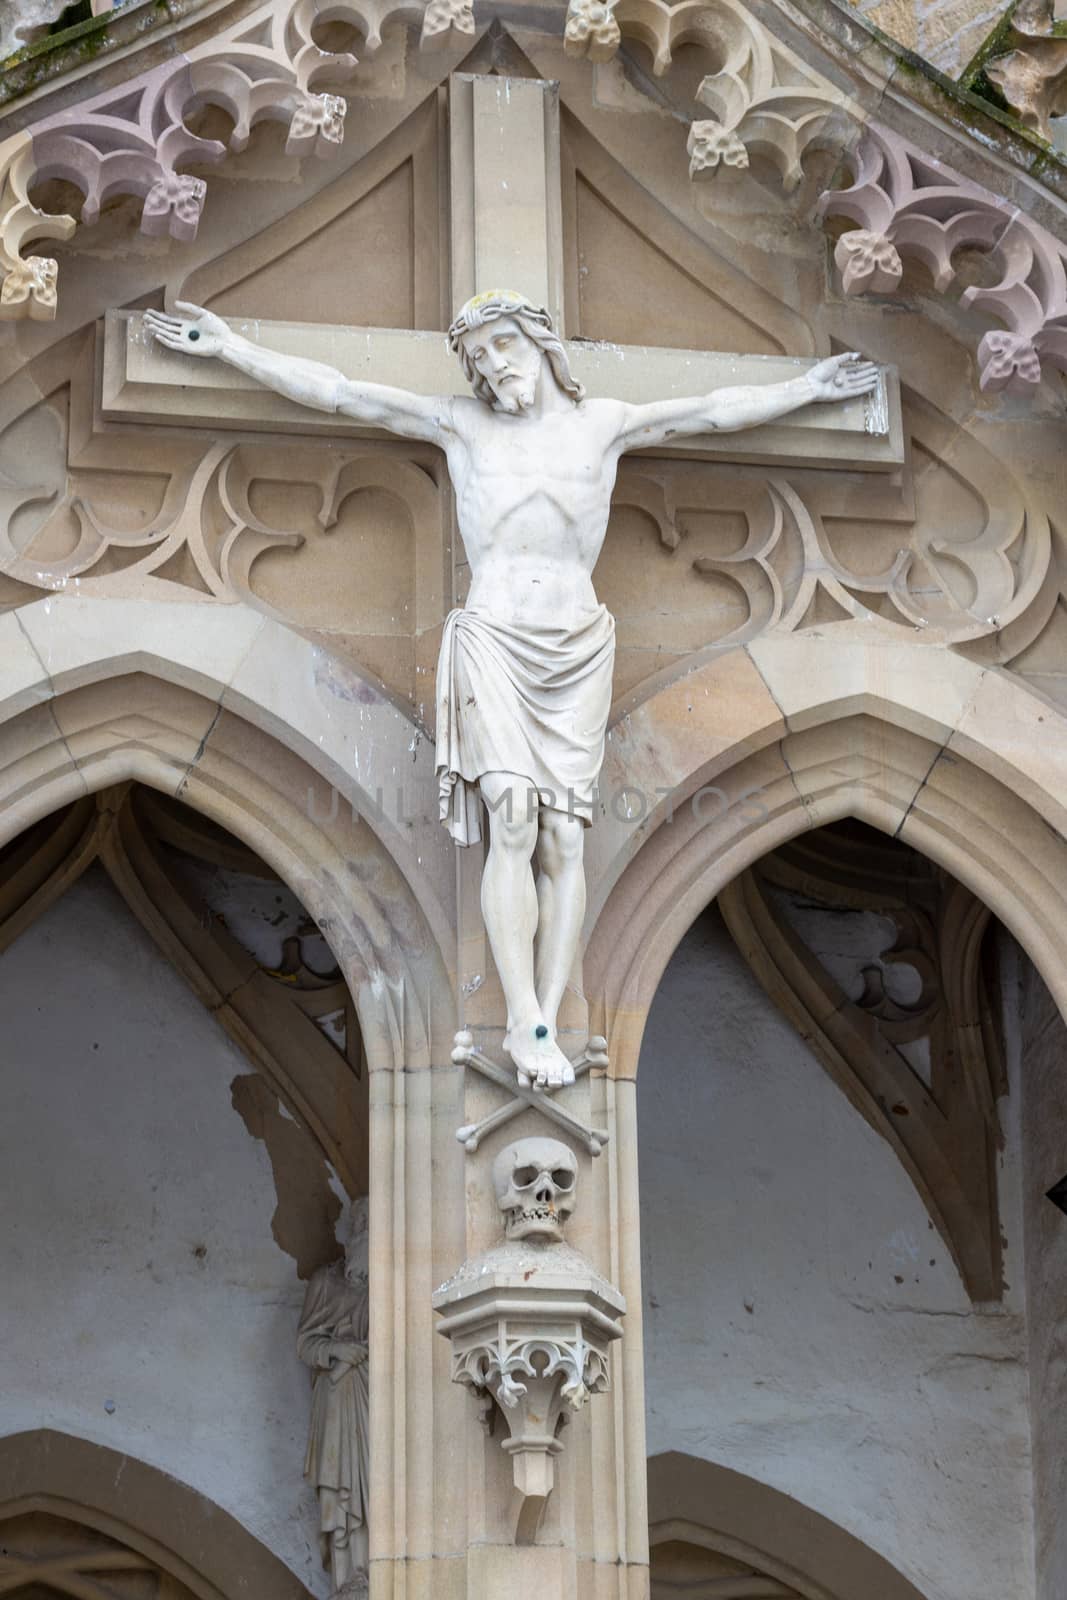 Cruciifix at entrance of the castle church in Meisenheim, Germany